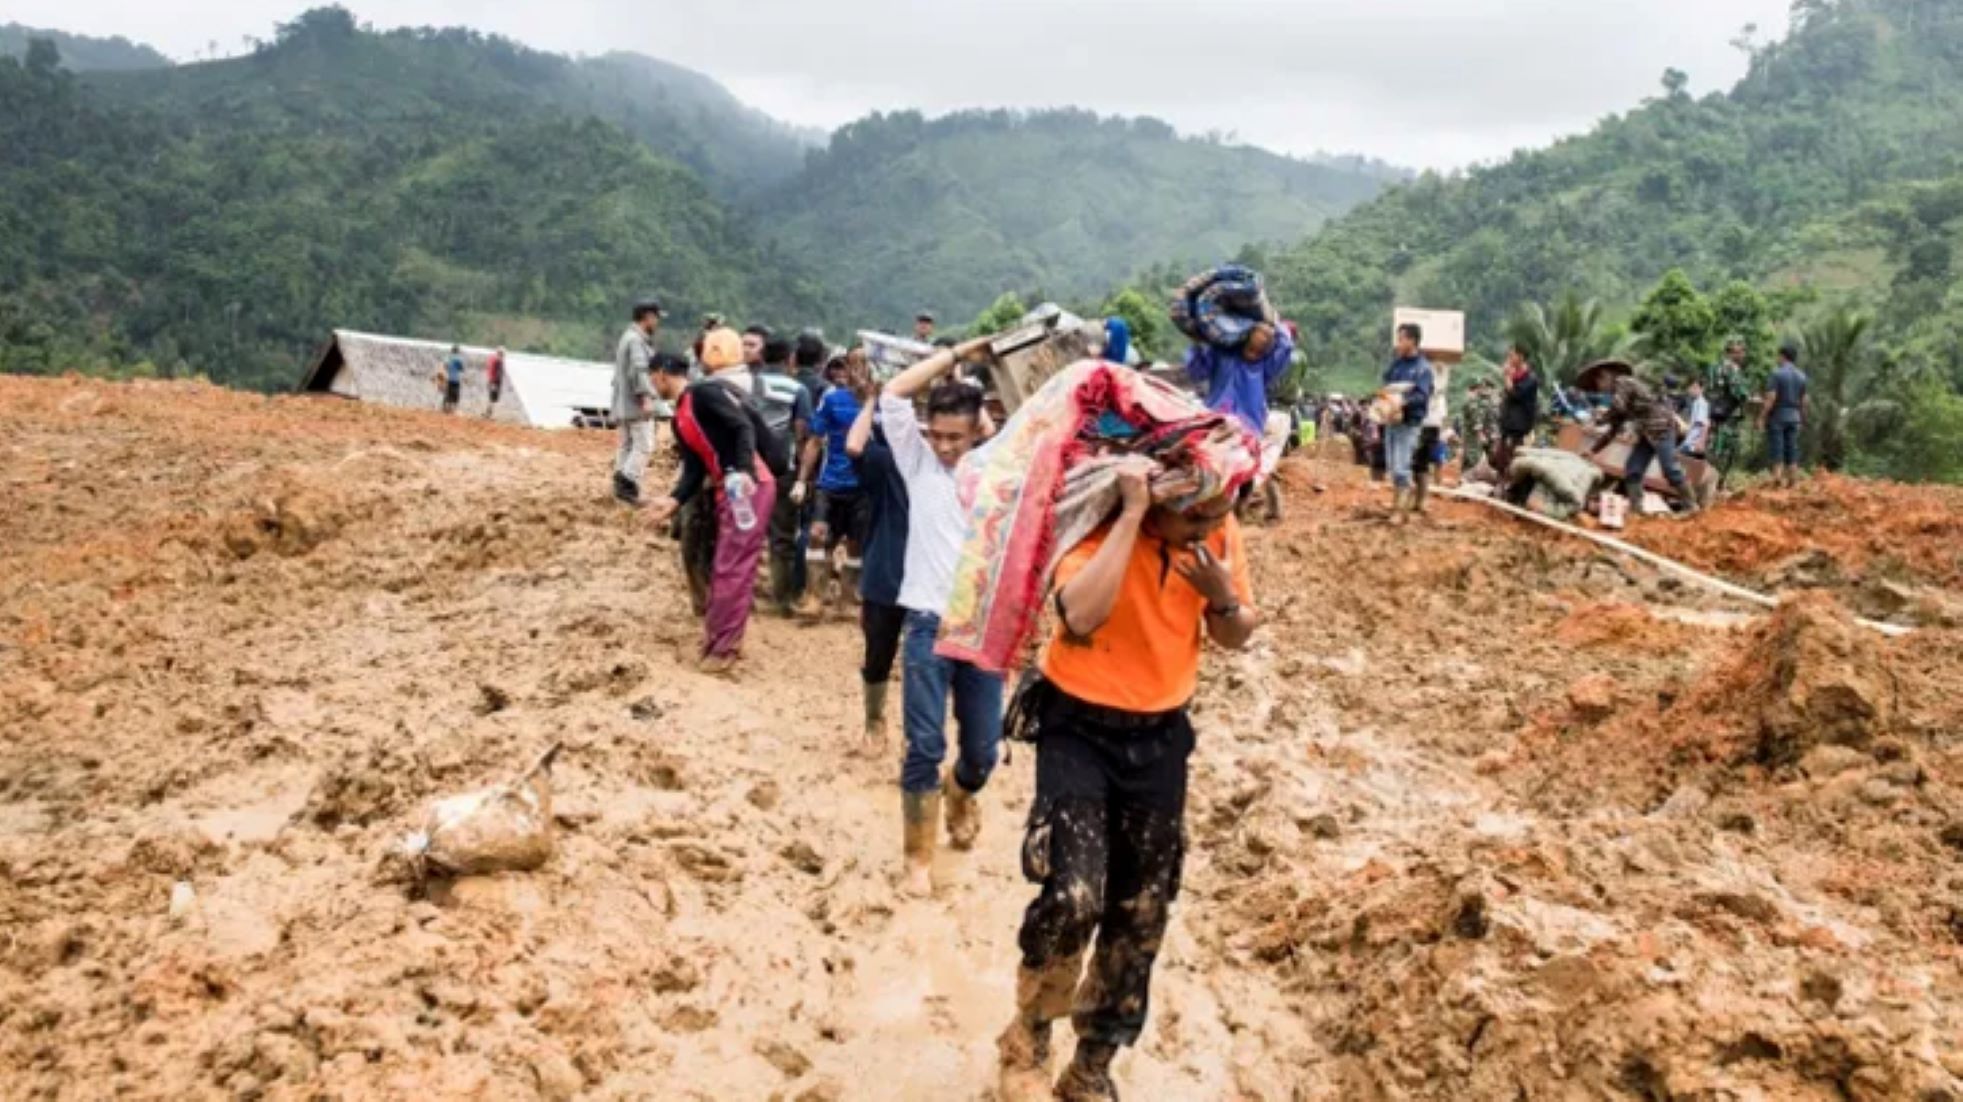 Death Toll In Indonesia’s South Sulawesi Landslides Rises To 20